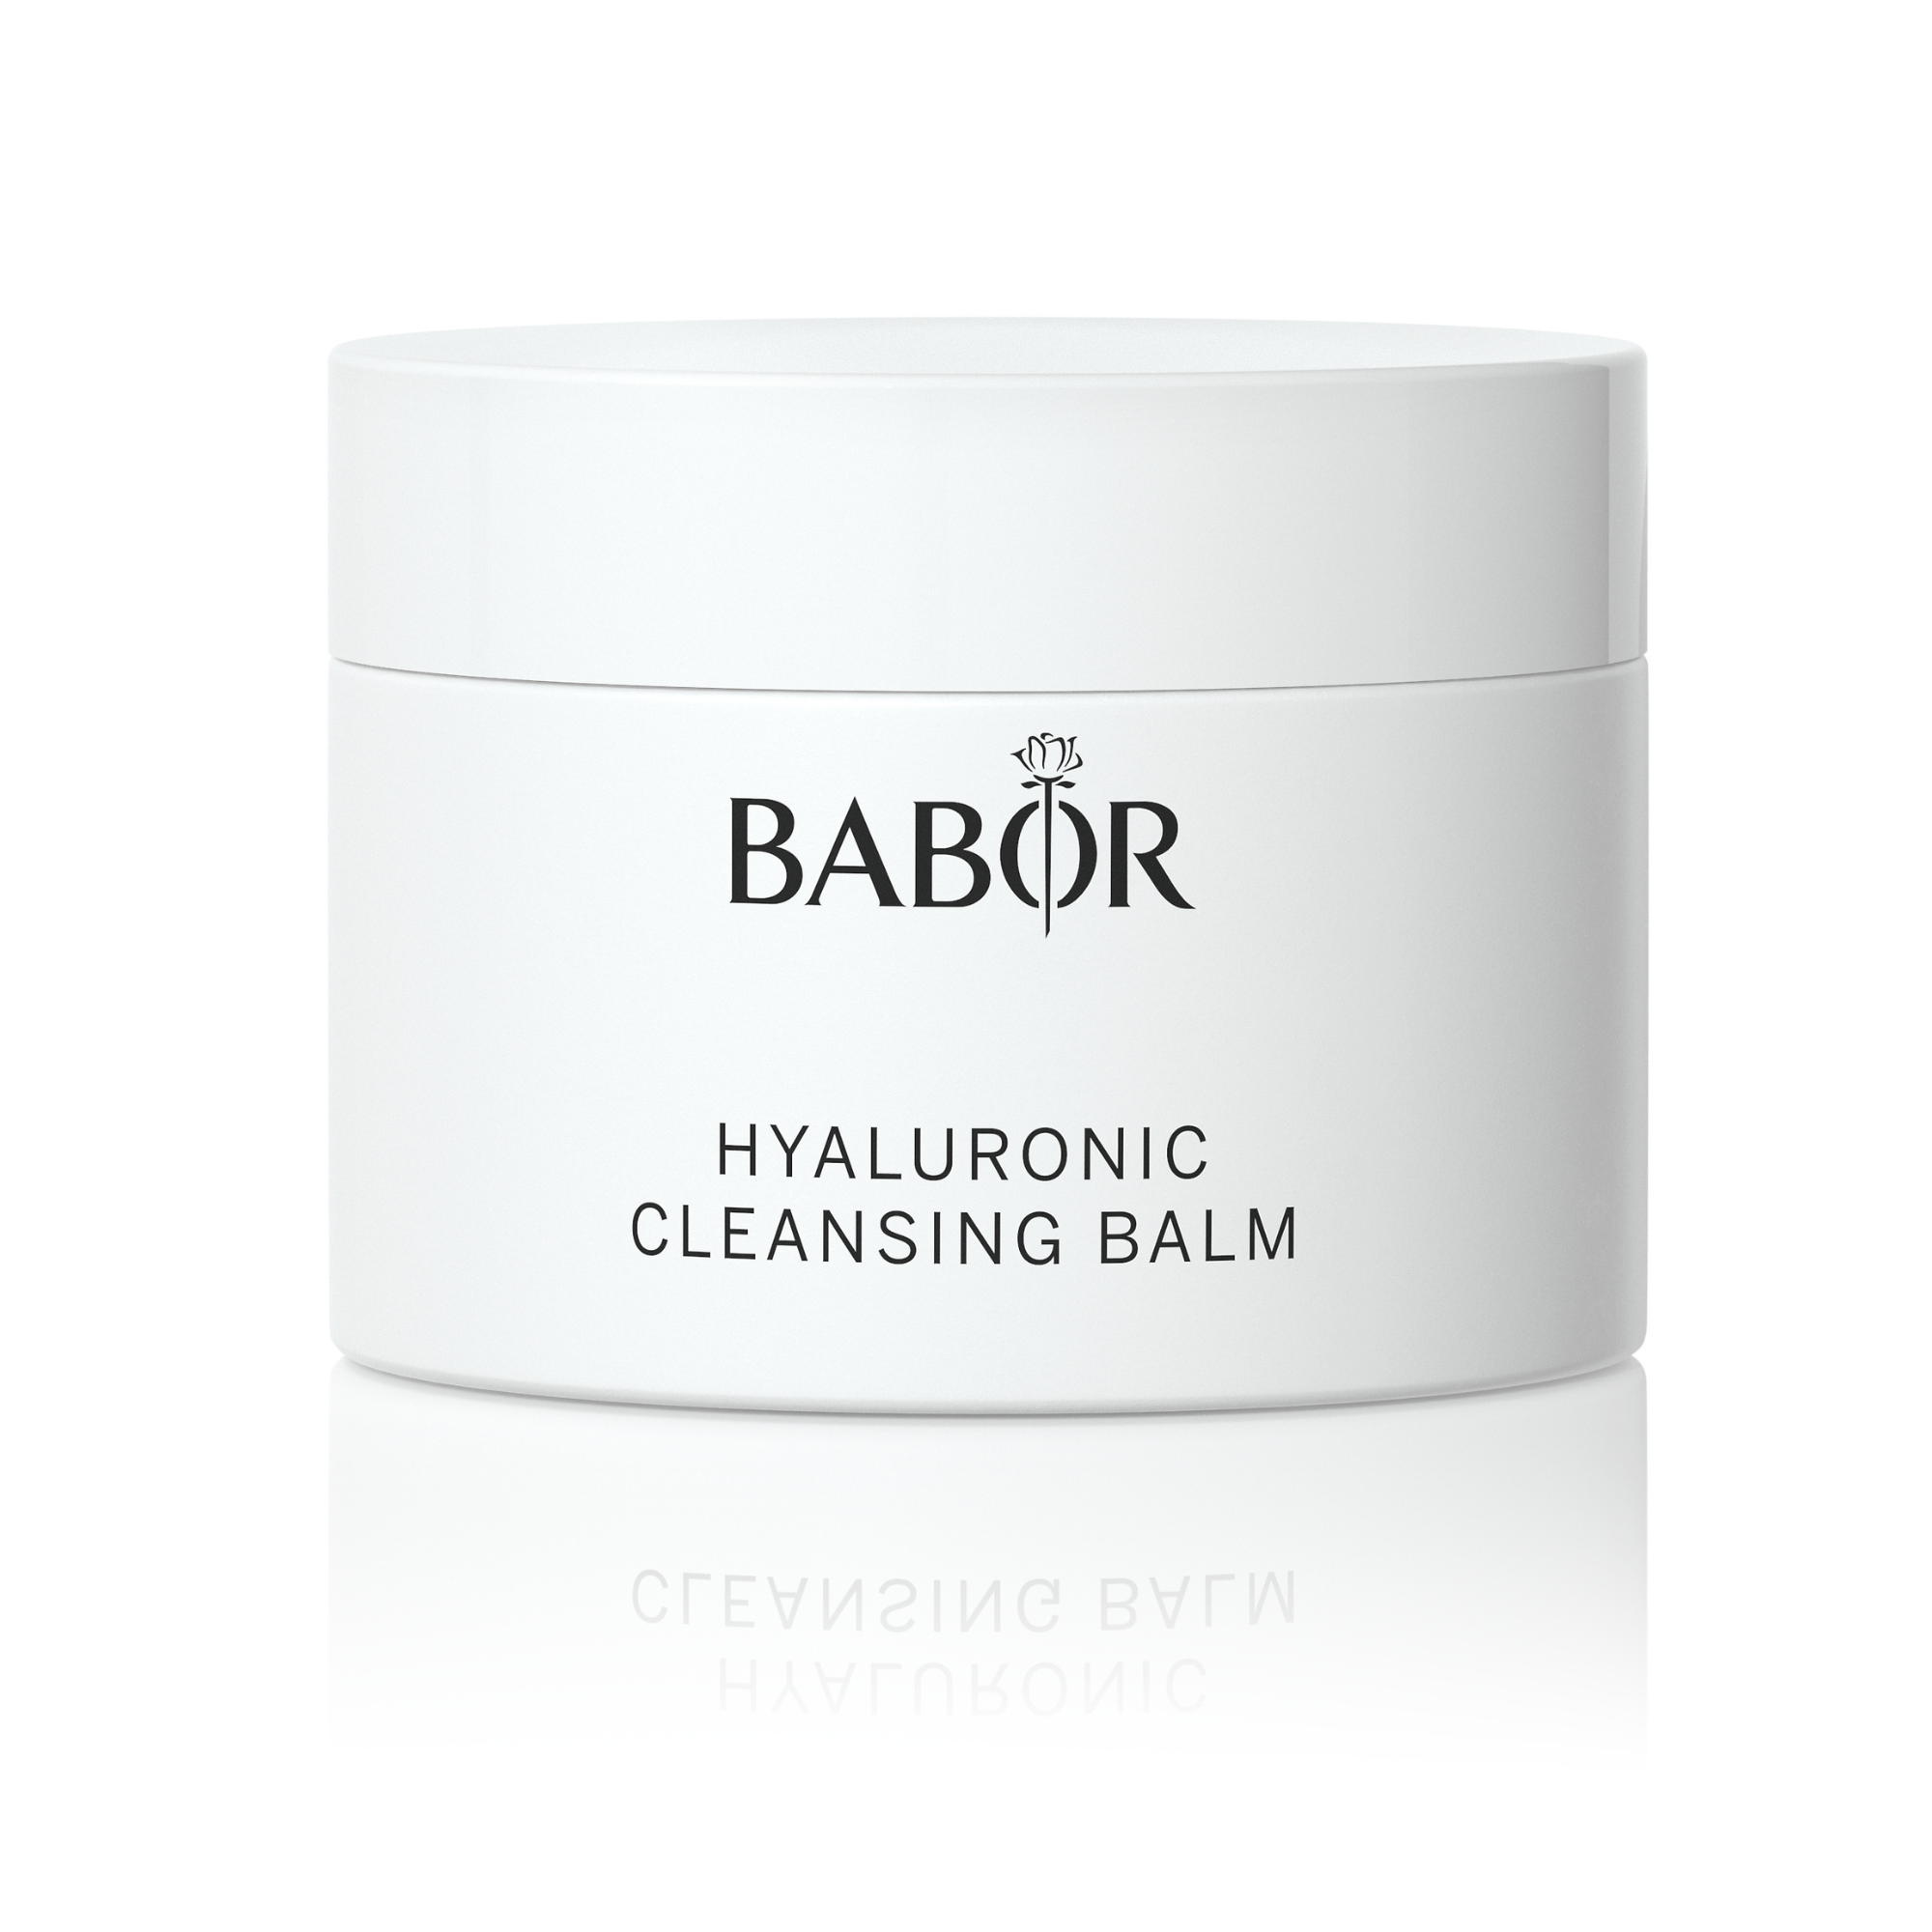 Village Wellness Spa - Babor Hyaluronic Cleansing Balm - Full Size 150ml